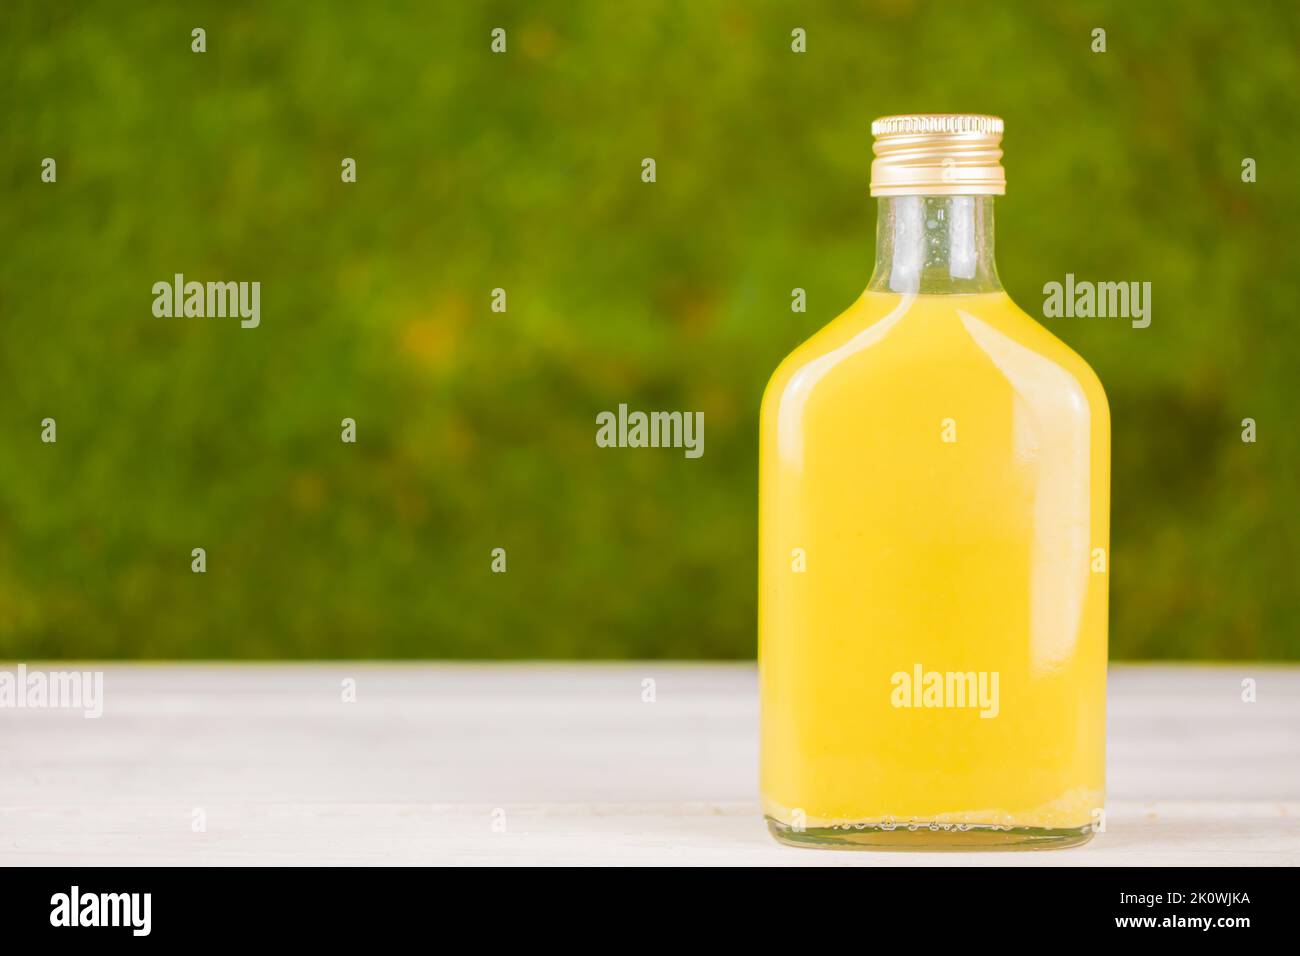 Yellow drink - homemade ginger shot, citrus juice or lemonade in glass bottle. Green background. Immunity boosting healthy drink. Copy space for text. Stock Photo